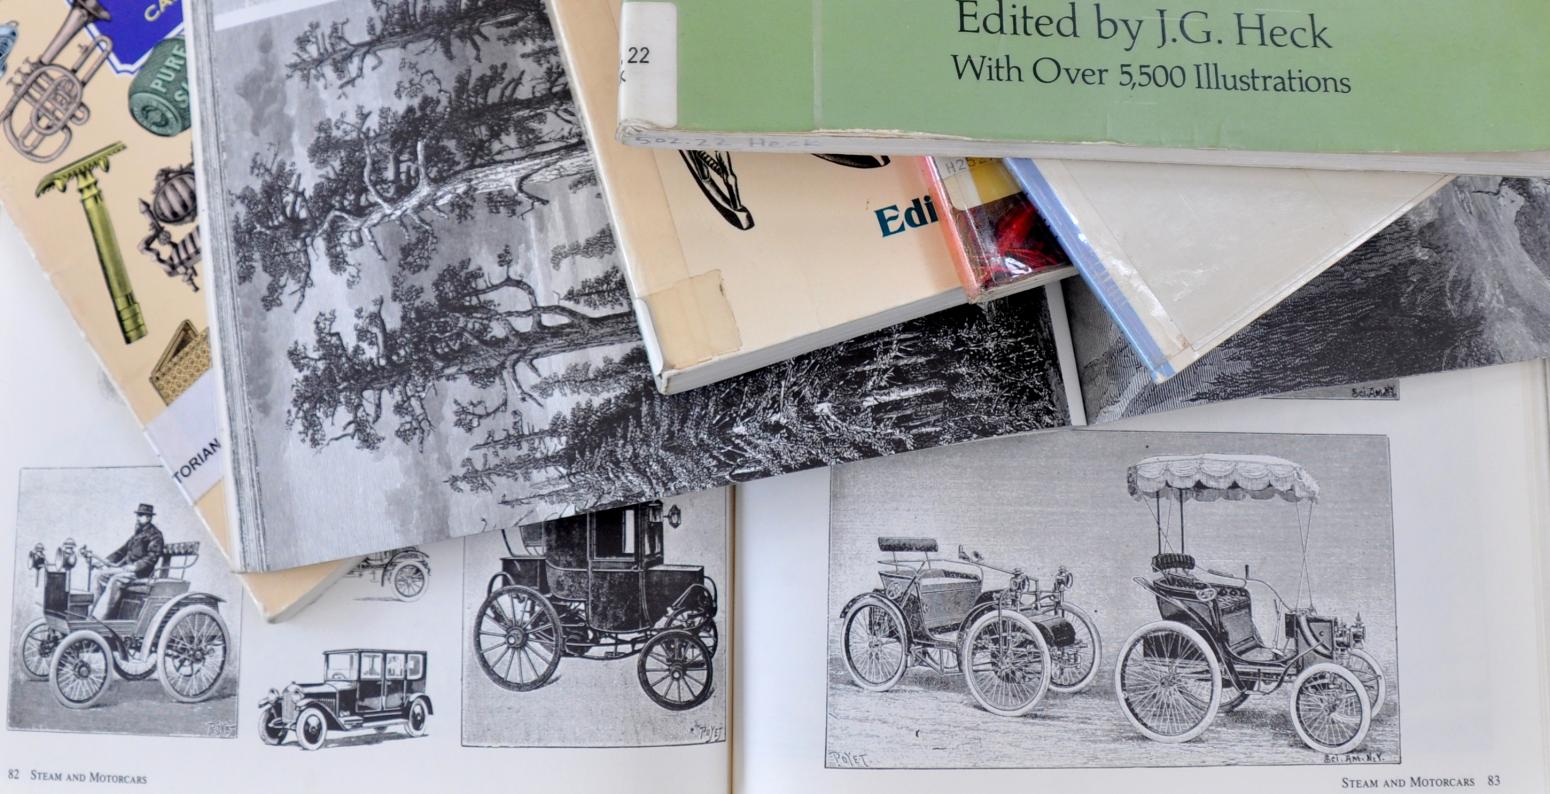 A stack of clip art books with transportation vehicles, landscapes, and animals.